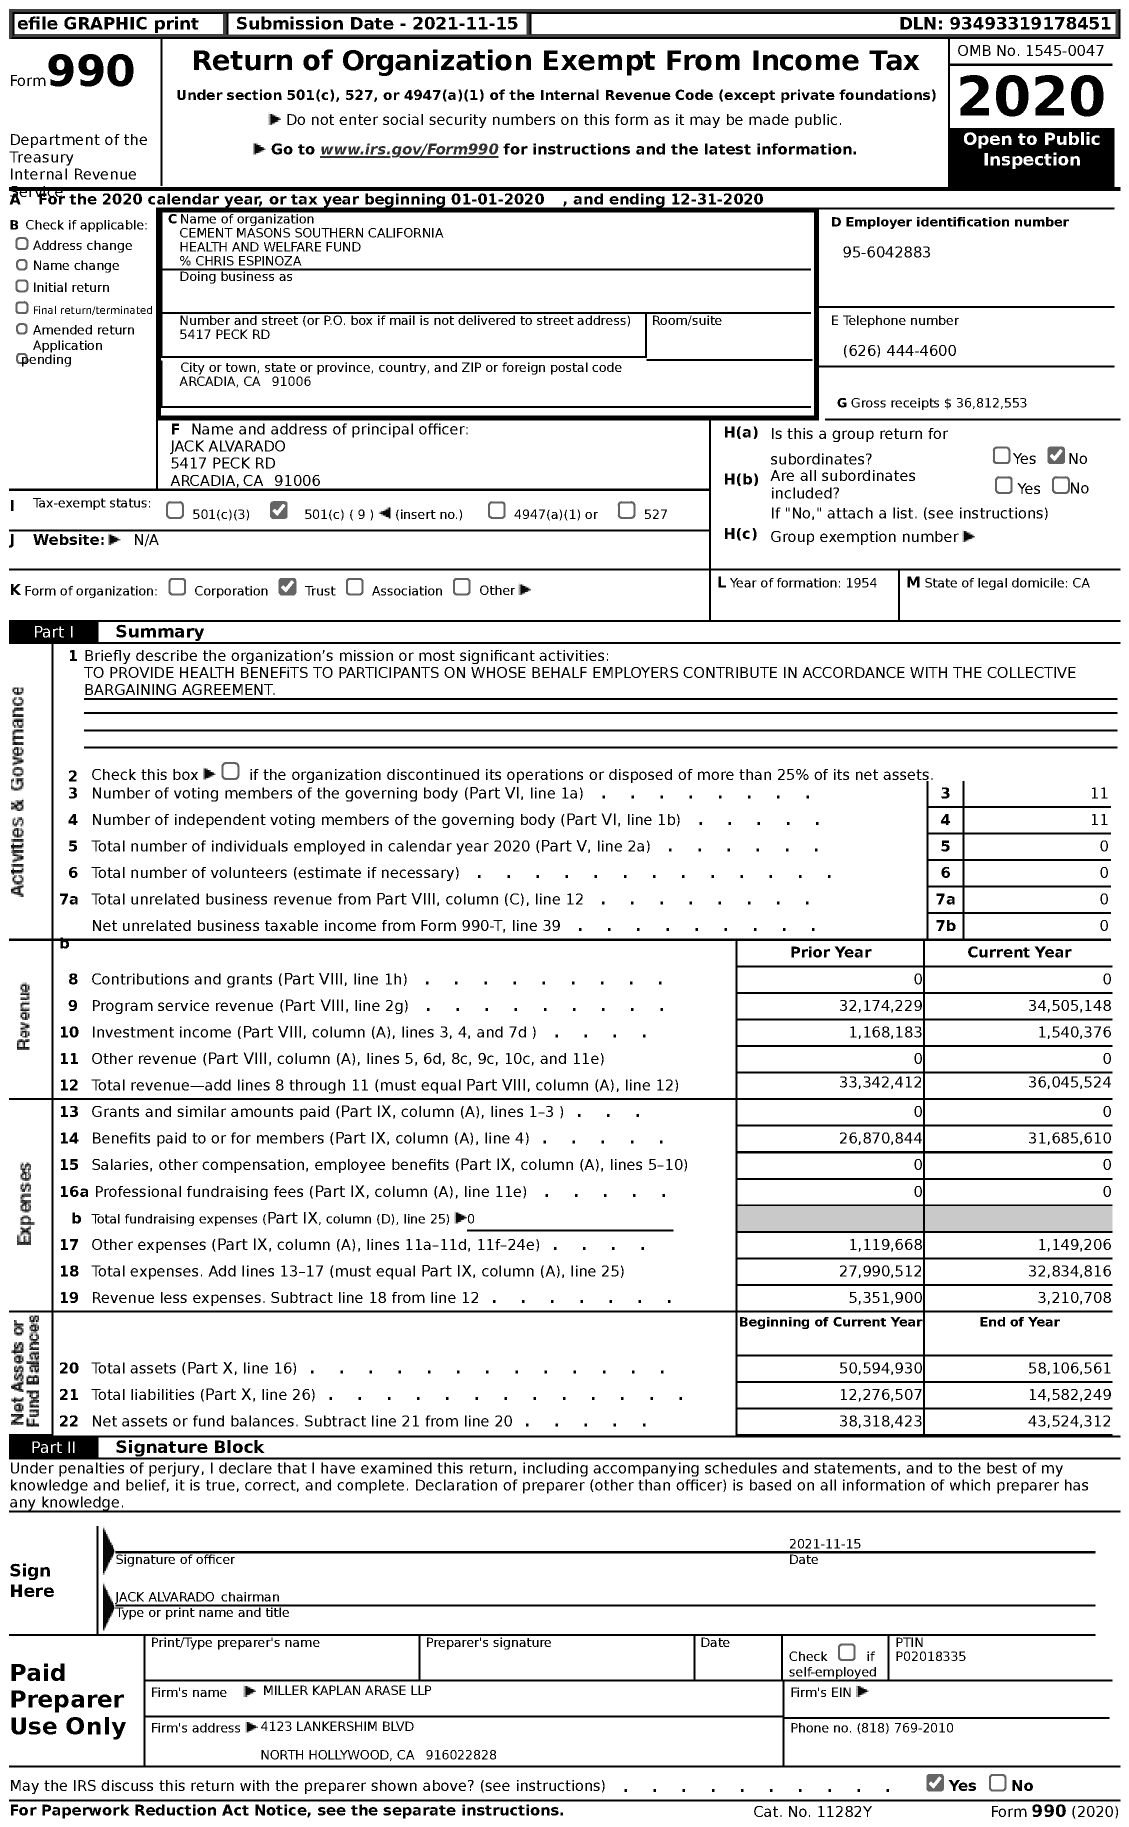 Image of first page of 2020 Form 990 for Cement Masons Southern California Health and Welfare Fund